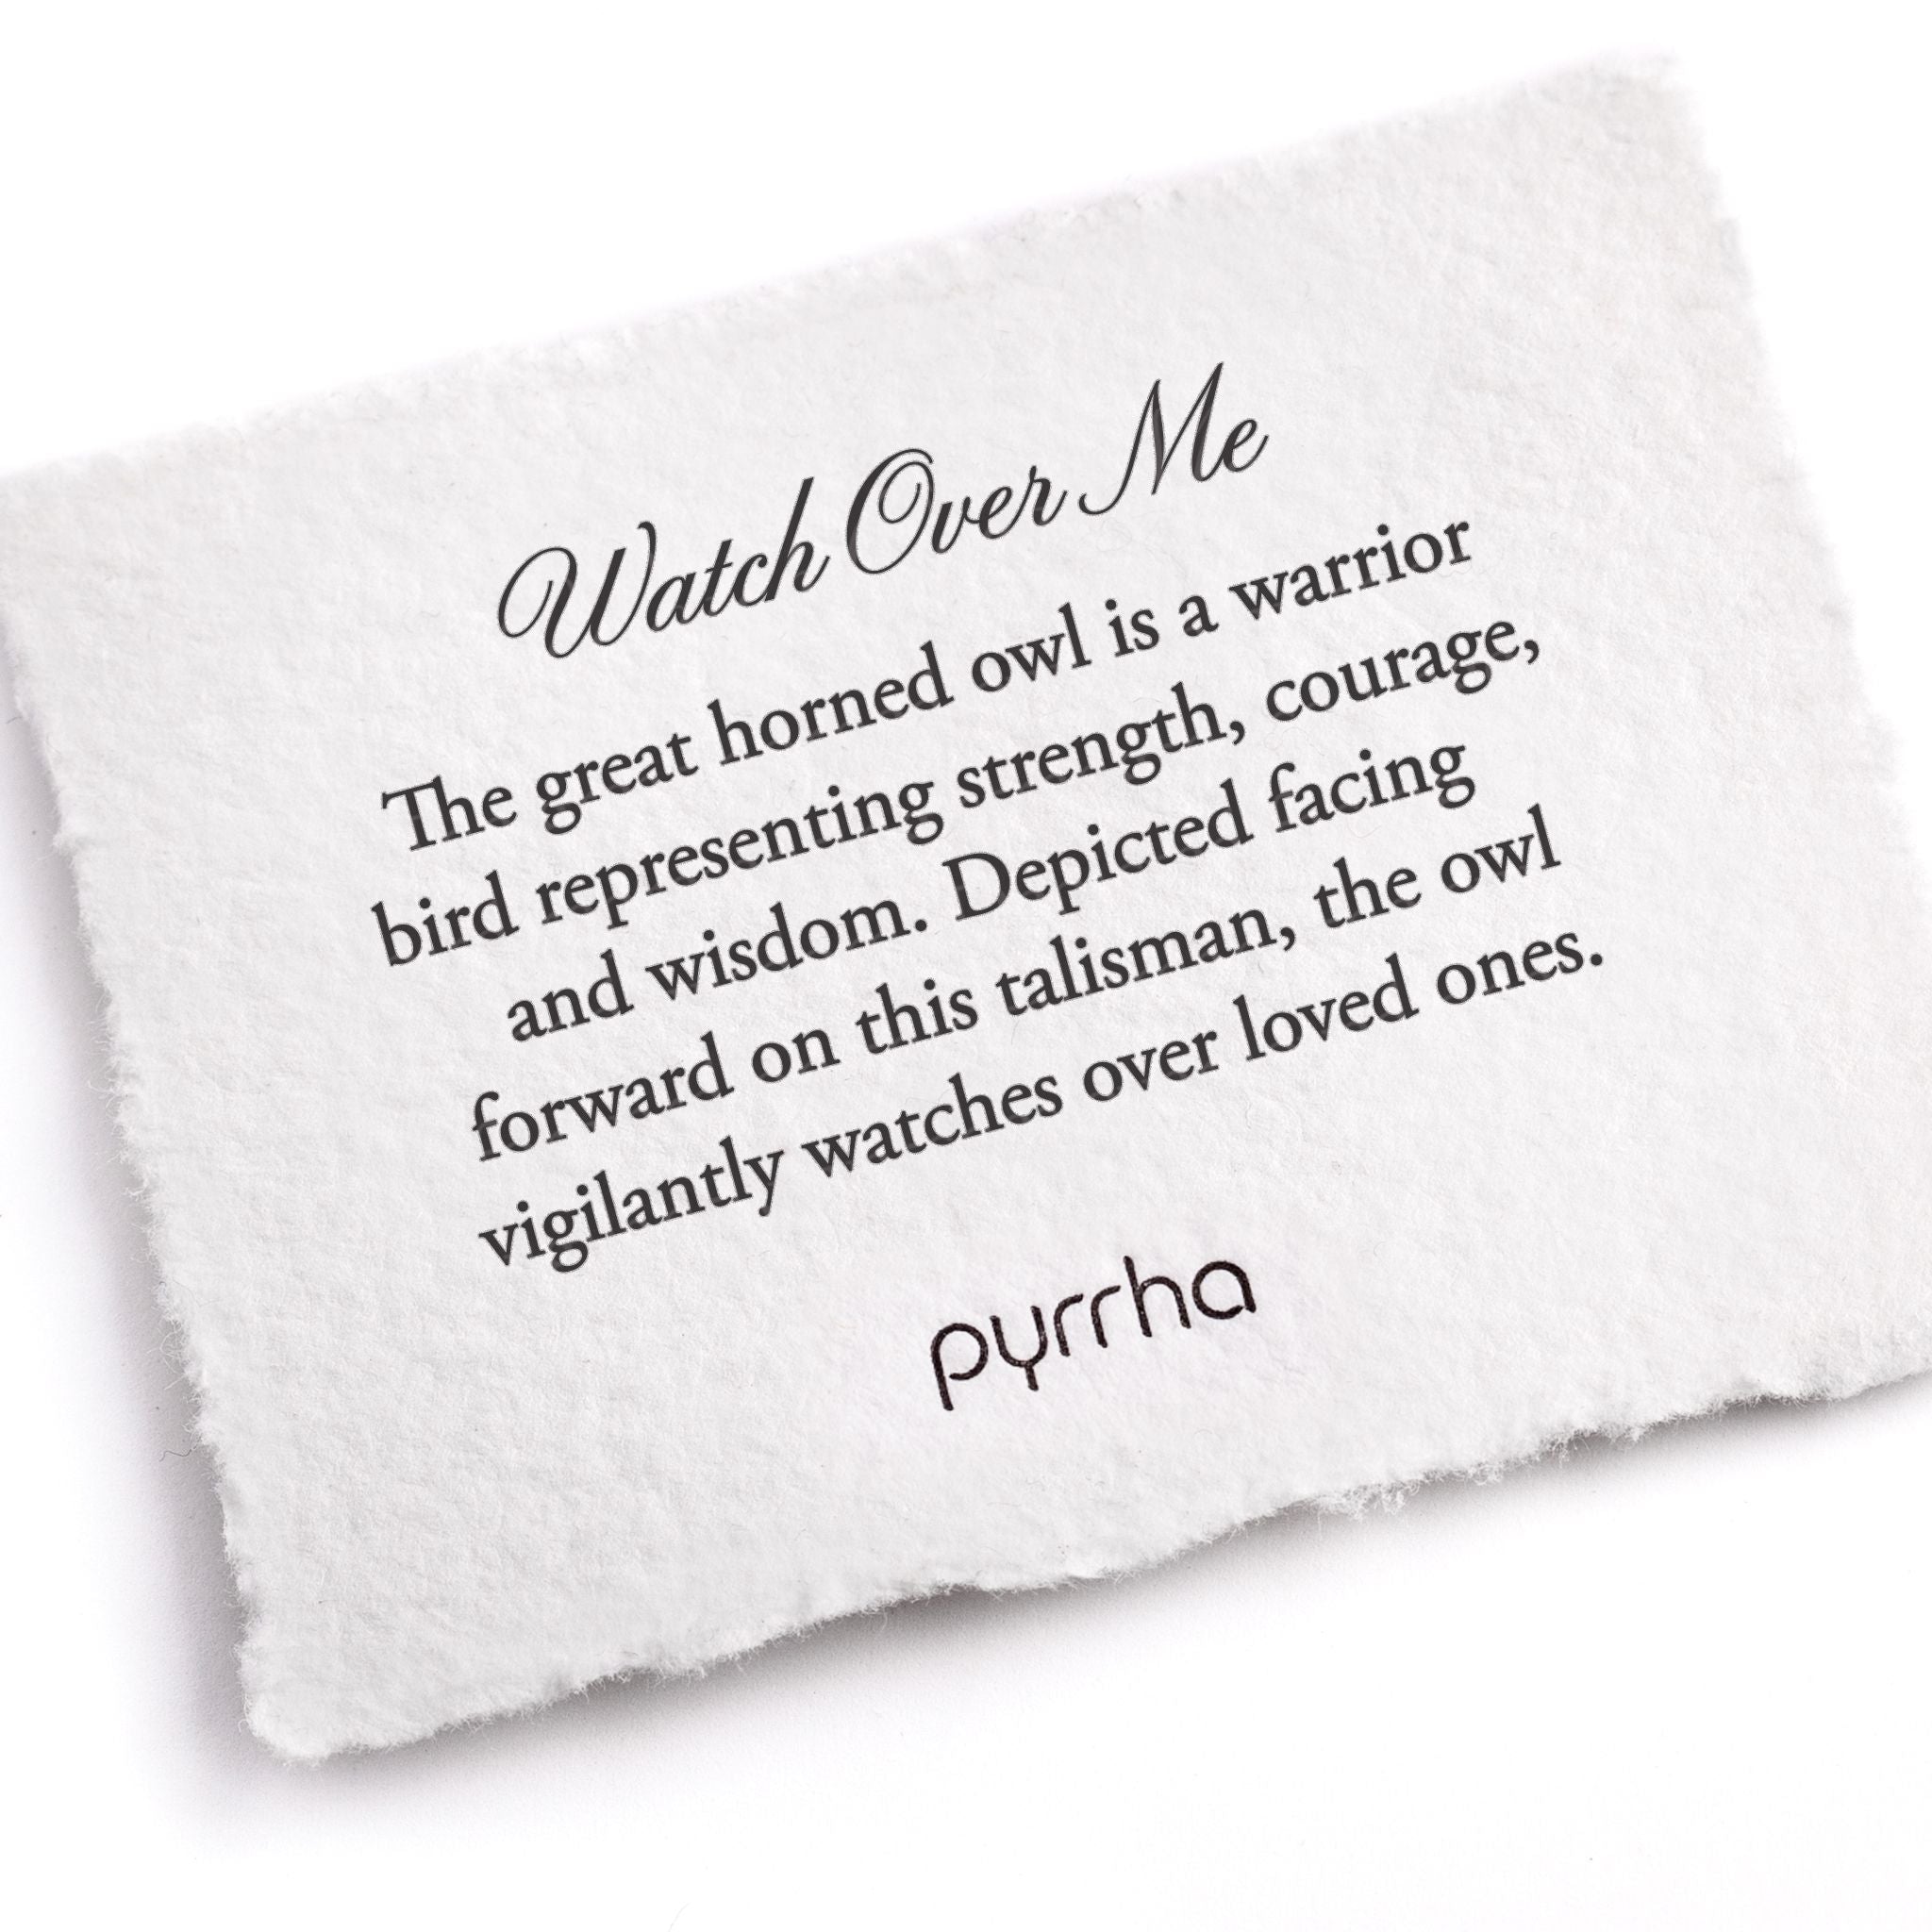 A hand-torn, letterpress printed card describing the meaning for Pyrrha's Watch Over Me Talisman Necklace